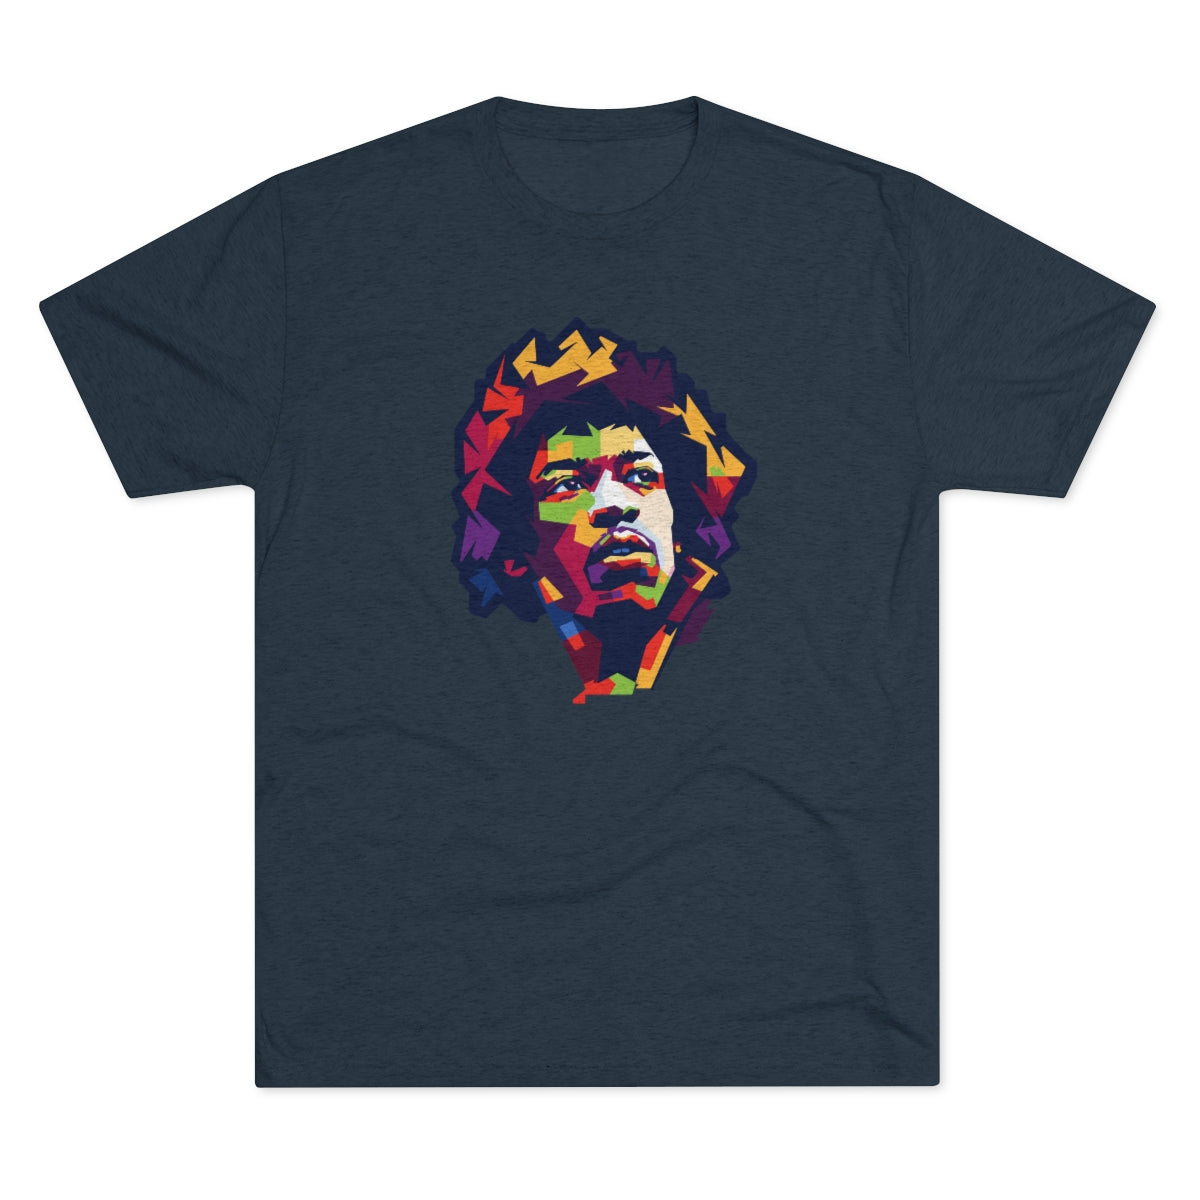 Jimmy Thing – Limited Edition – Unisex Tri-Blend Crew Tee